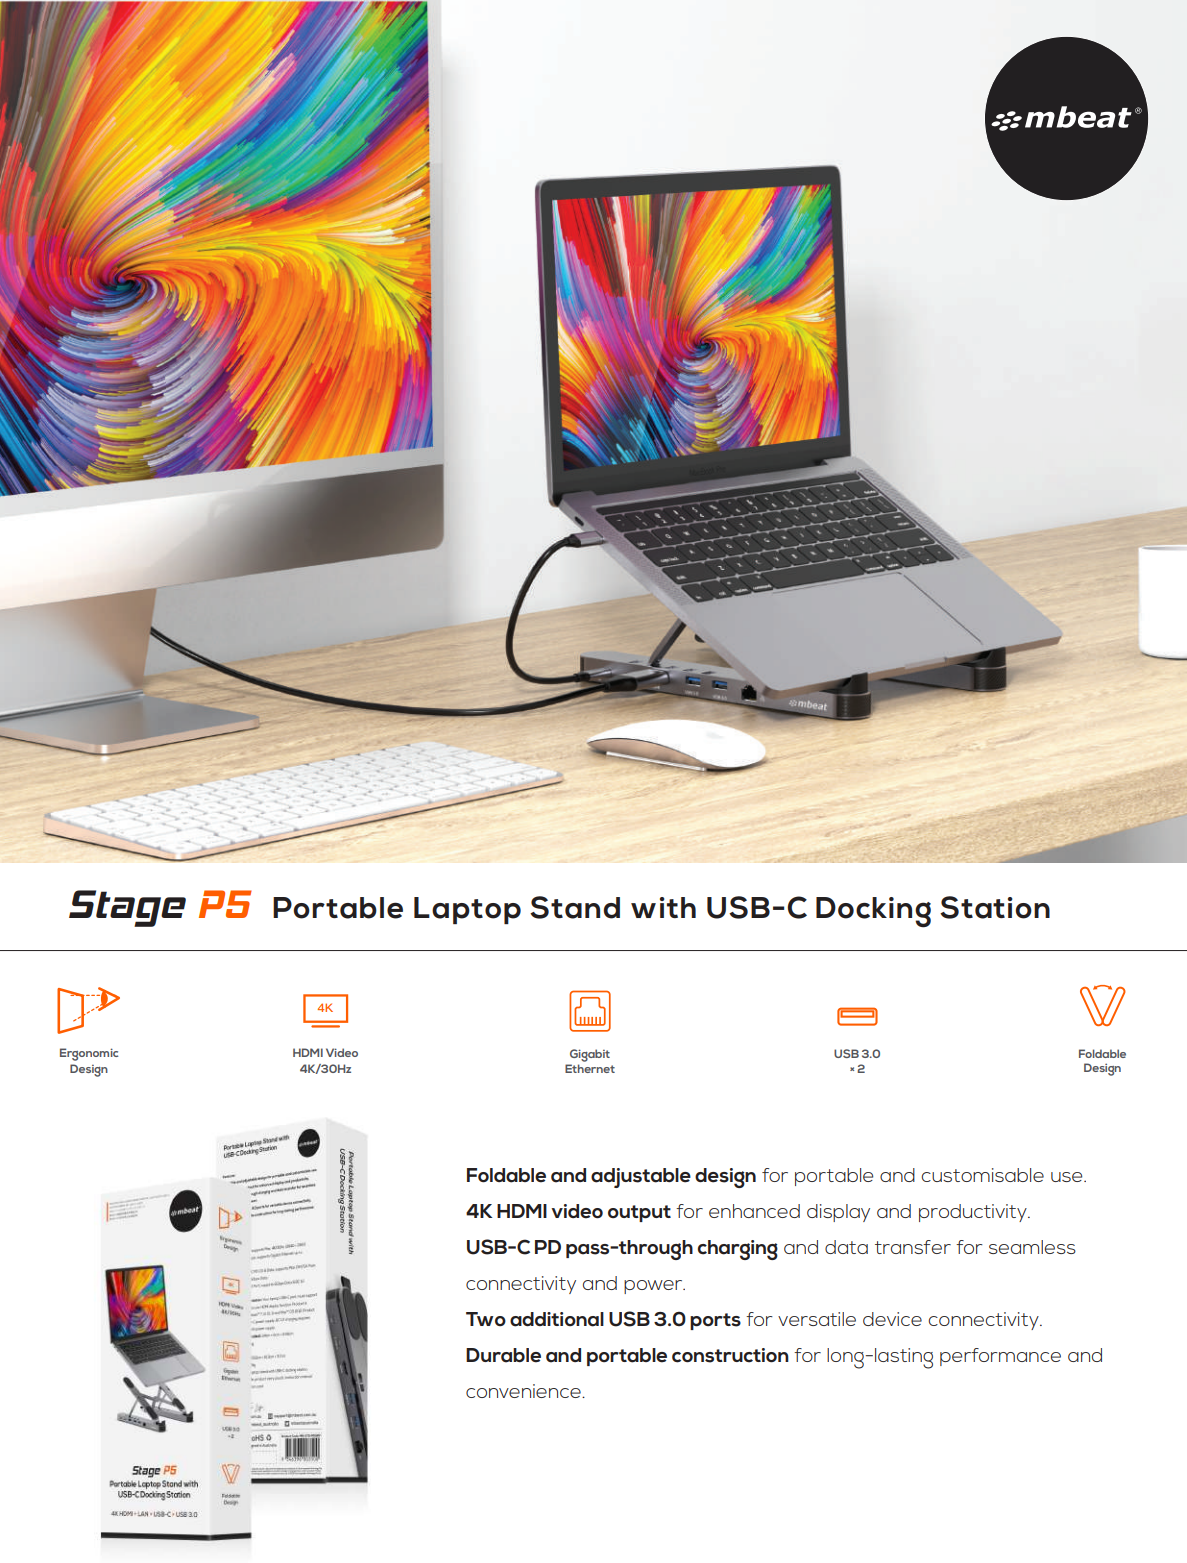 A large marketing image providing additional information about the product mBeat Stage P5 Portable Laptop Stand with USB-C Docking Station - Additional alt info not provided